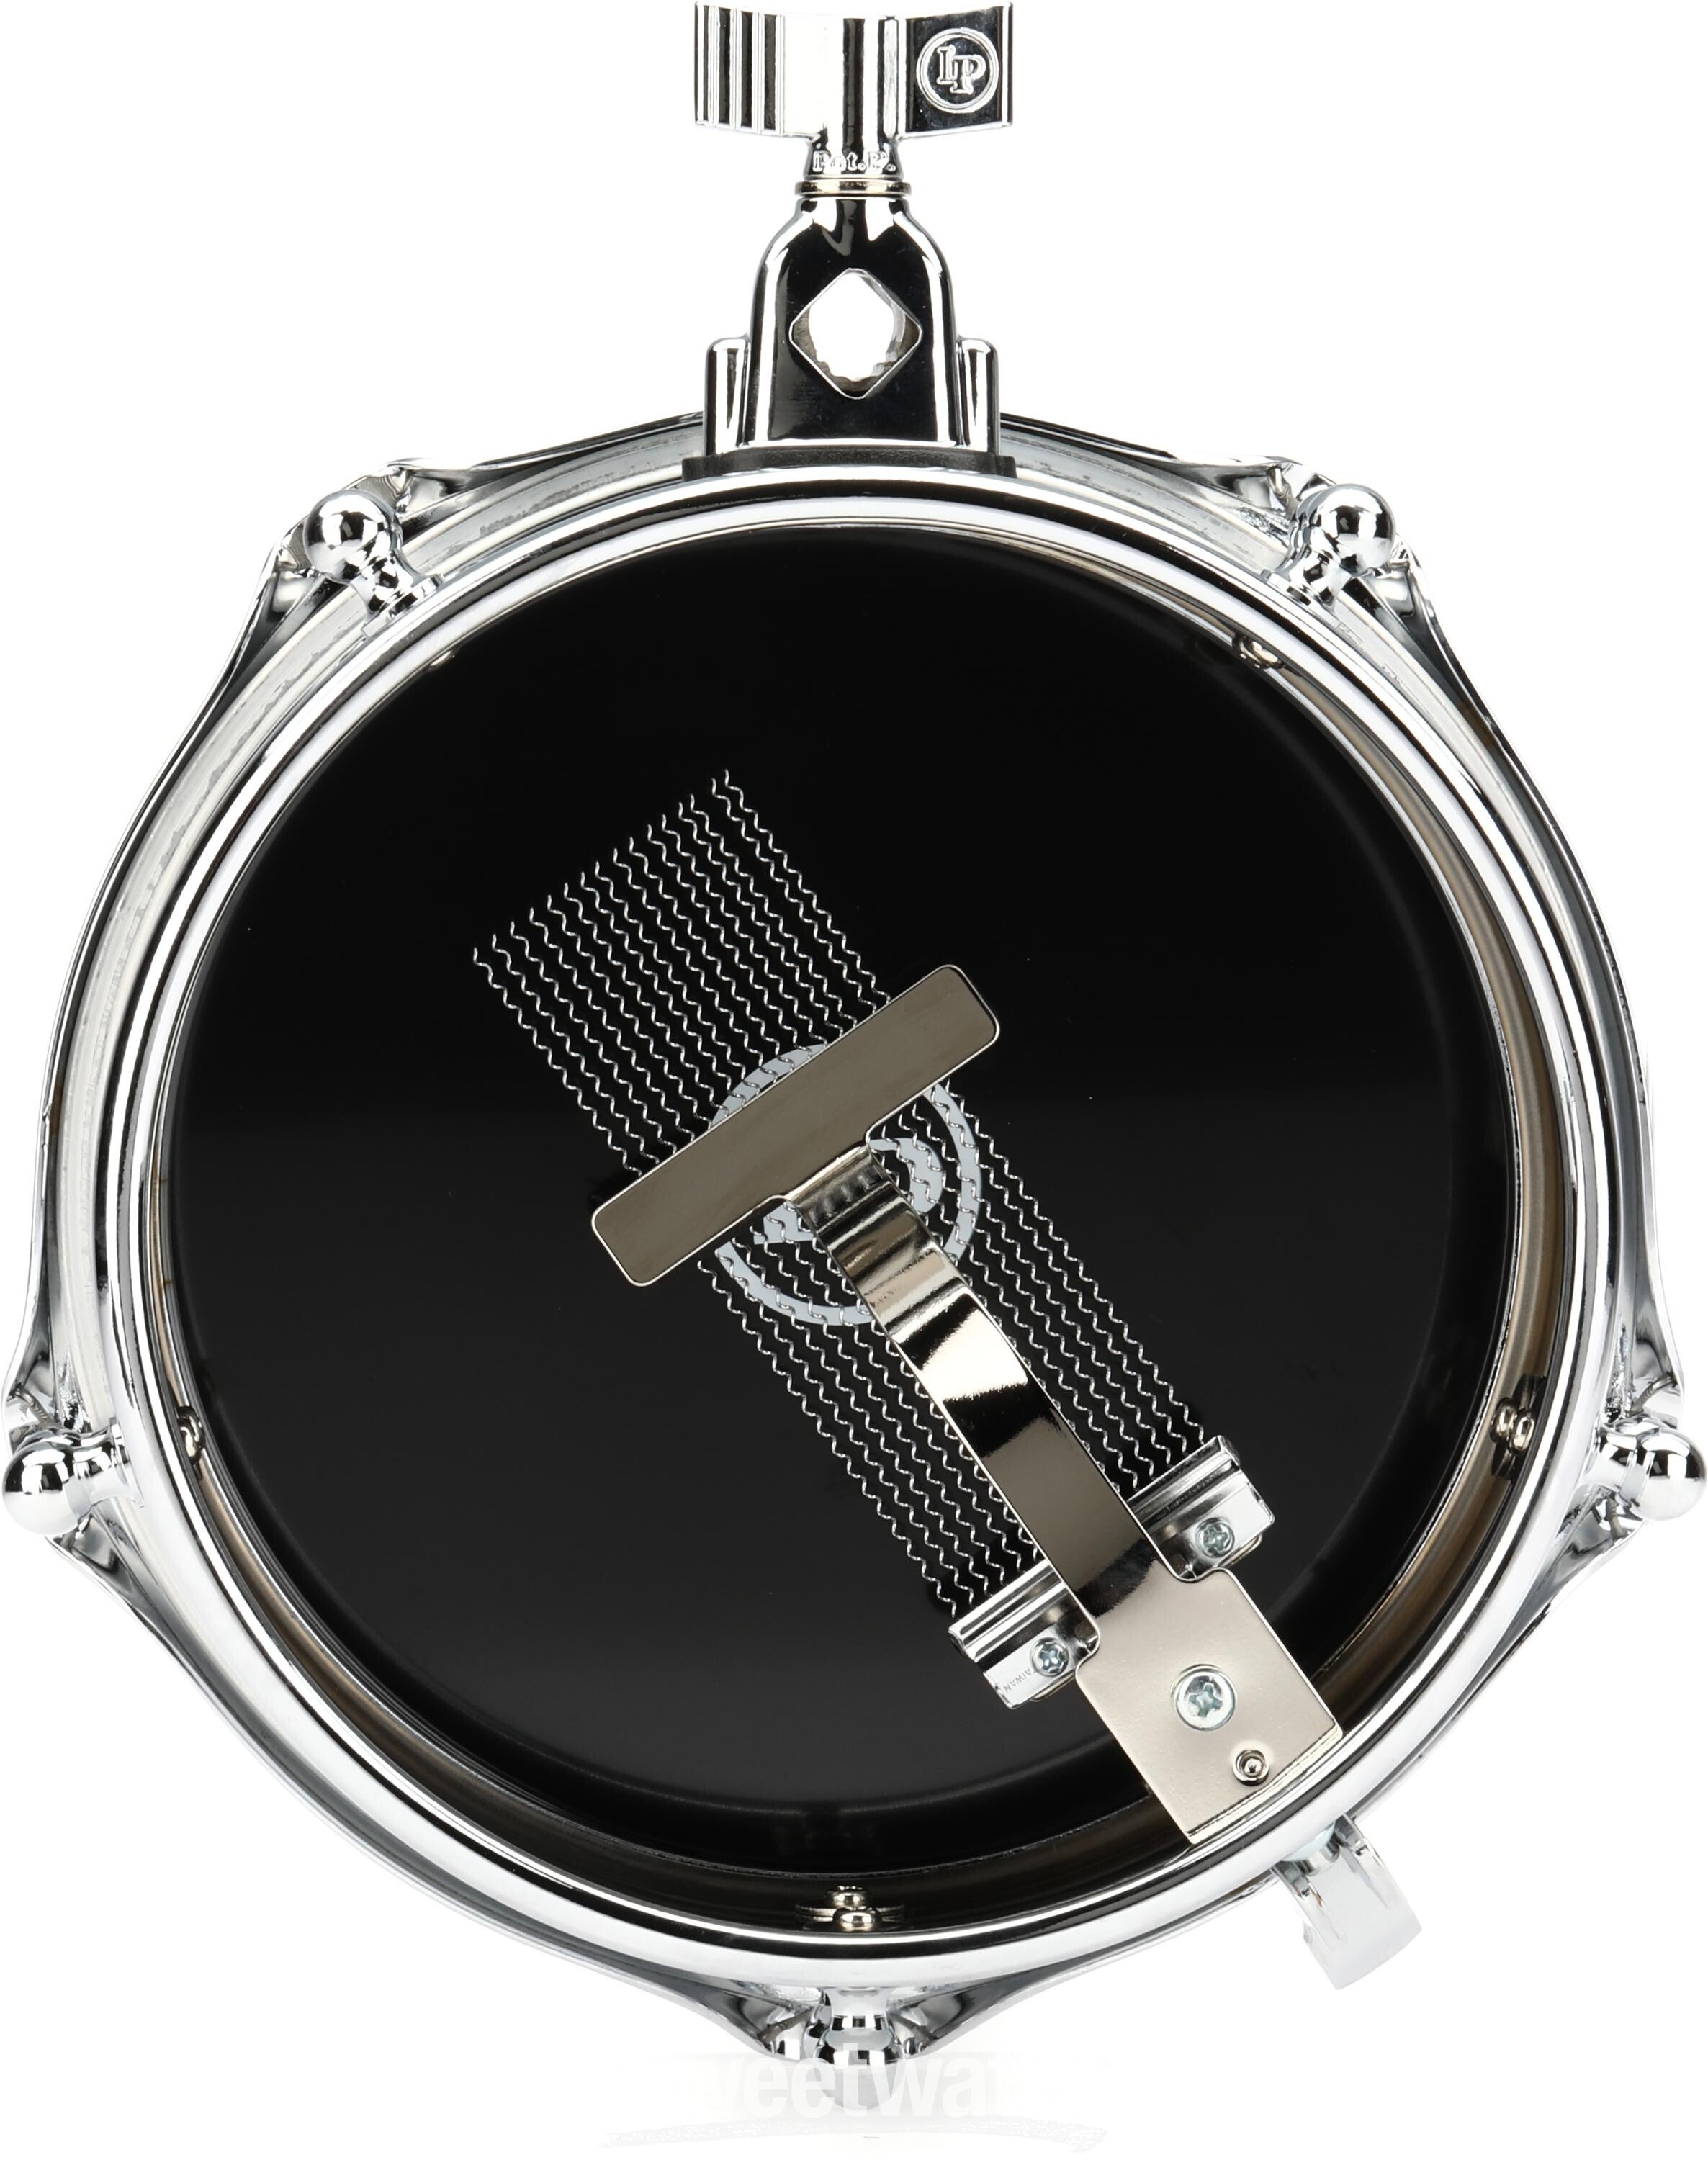 Latin Percussion Micro Snare - 8 inch | Sweetwater